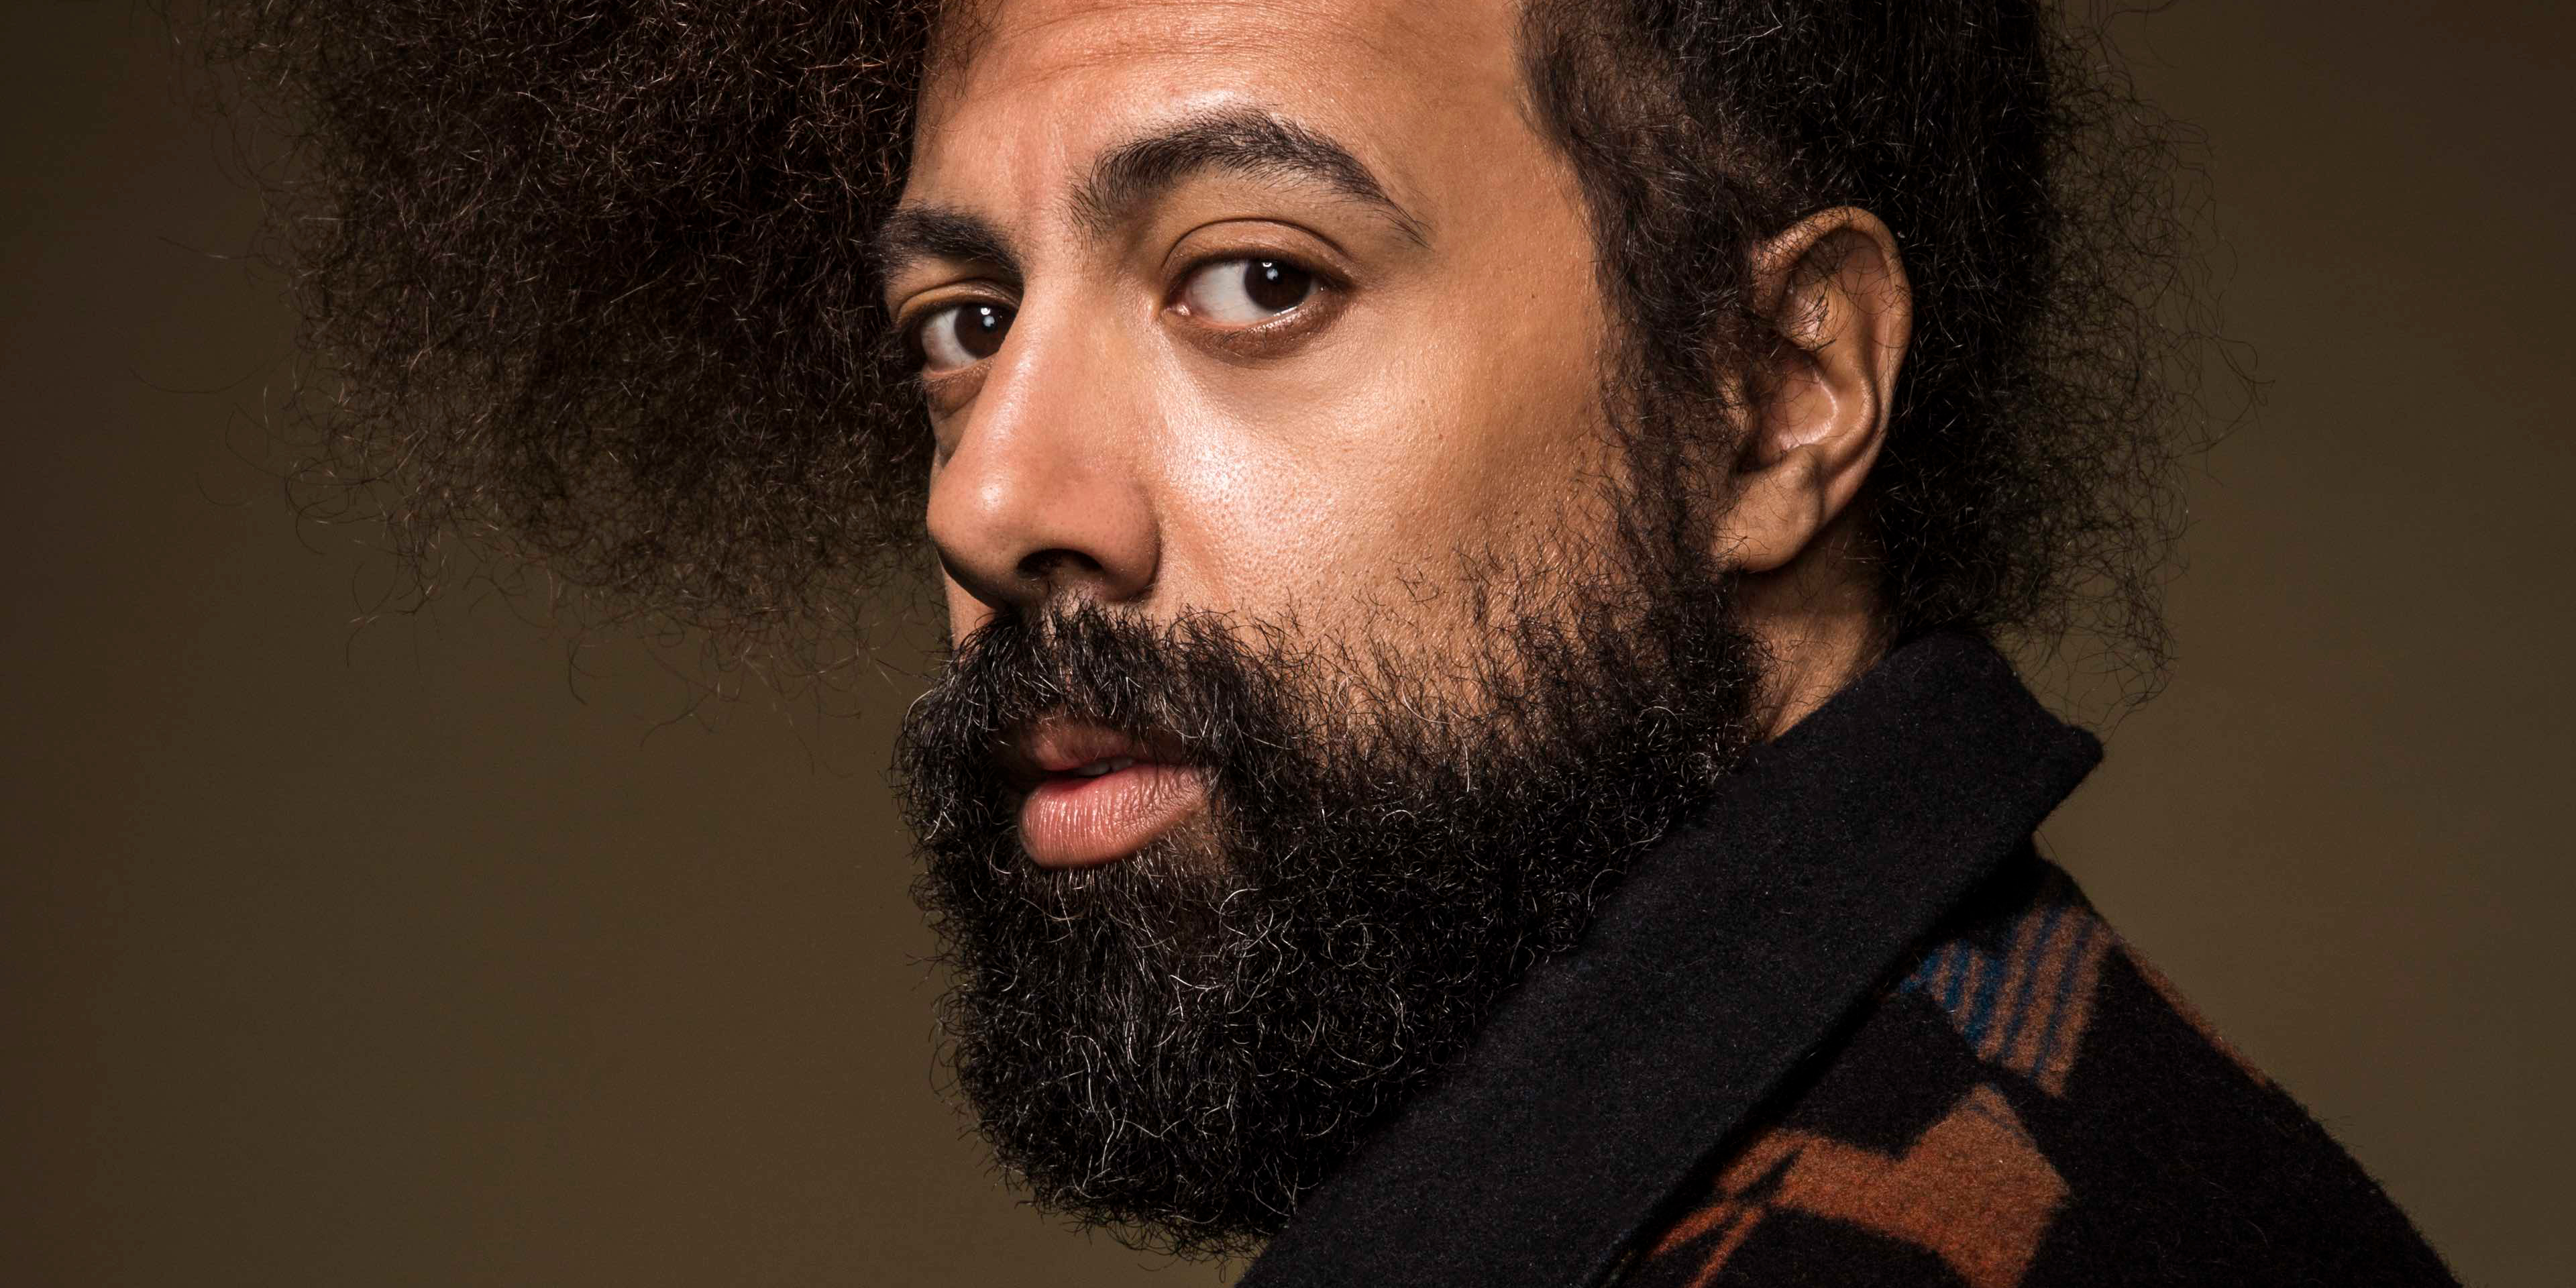 FROM THE LATE LATE SHOW WITH JAMES CORDEN, U.S. COMEDIAN REGGIE WATTS ANNOUNCES ONE OFF LONDON SHOW ON 15TH JUNE